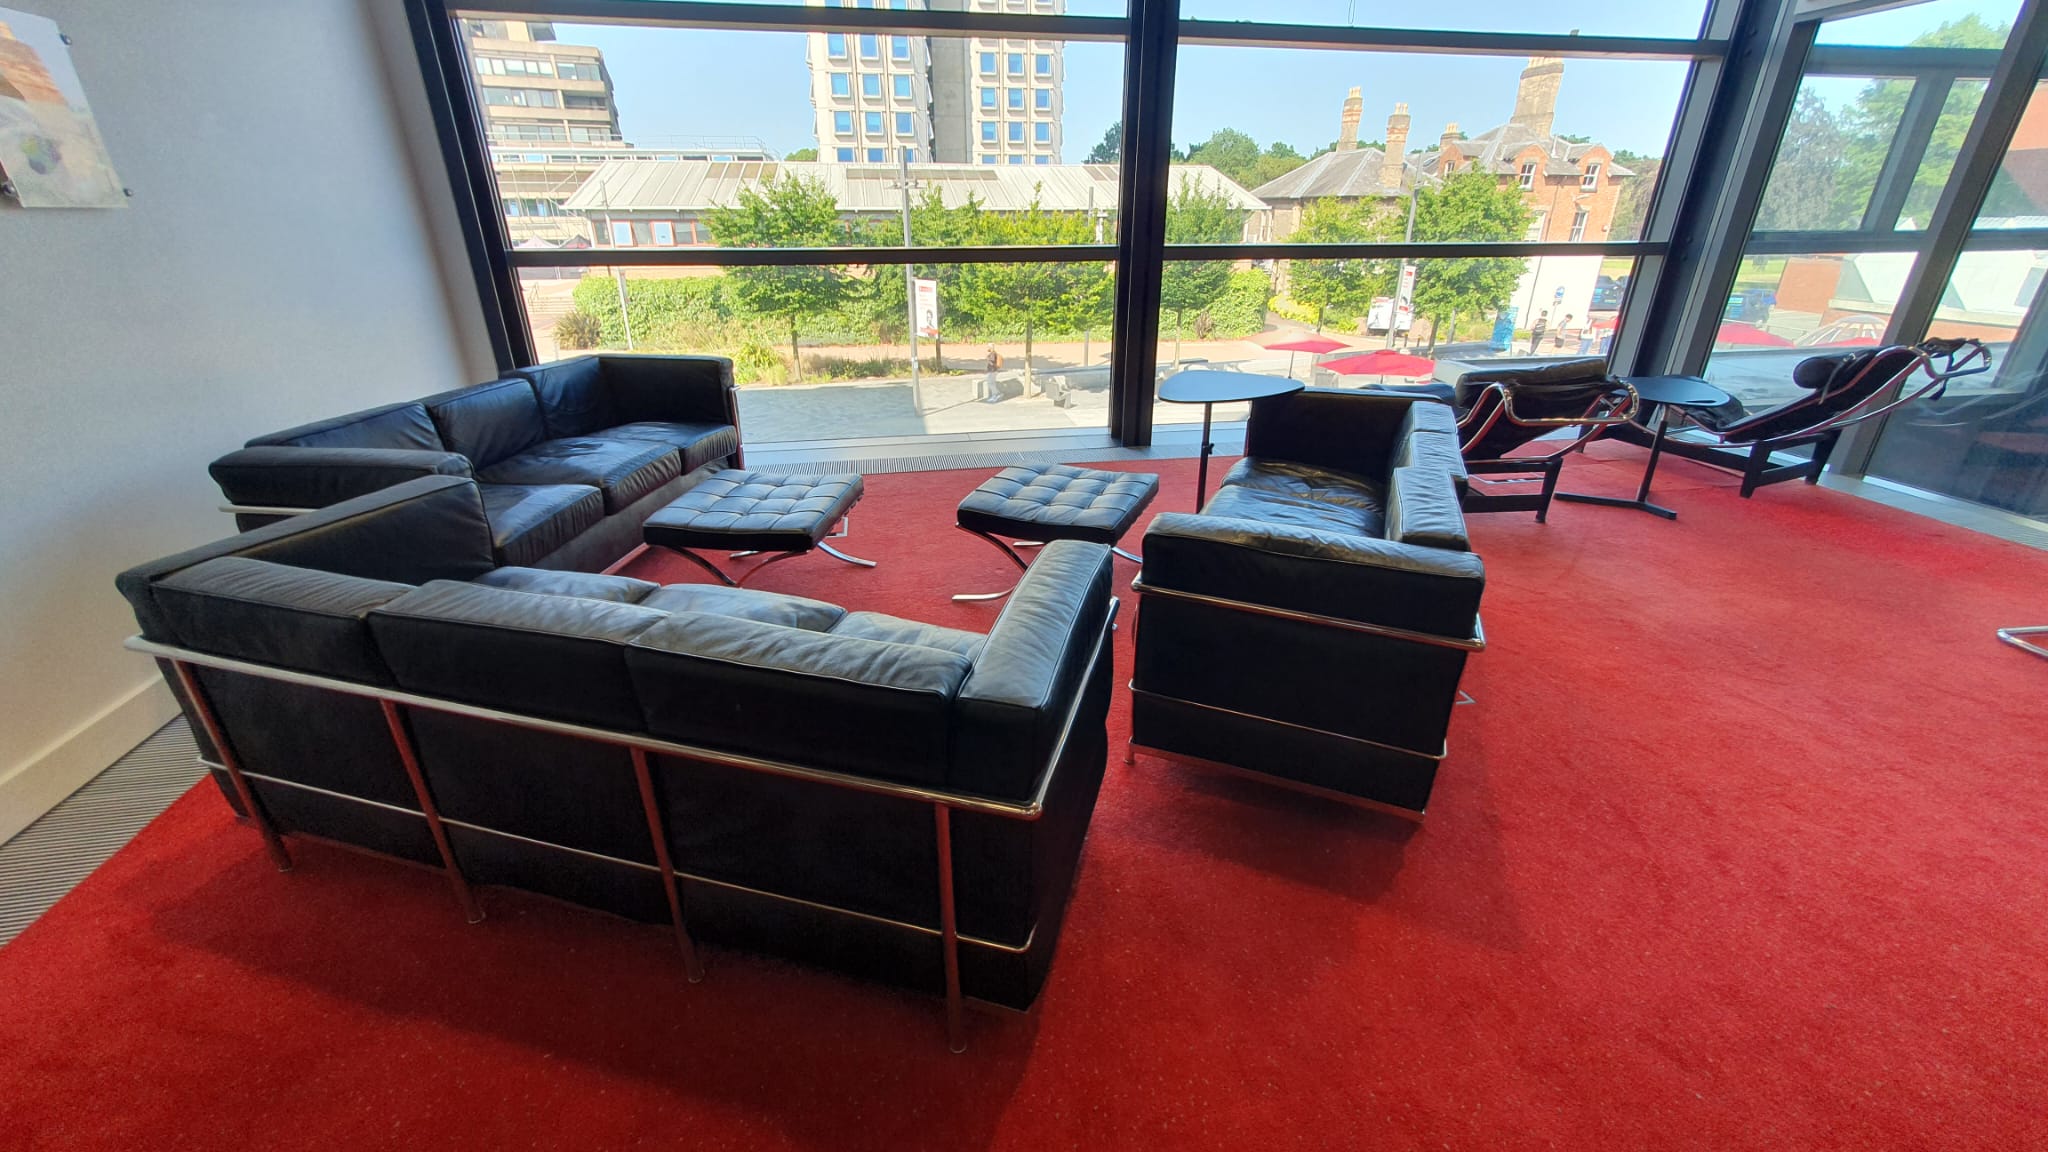 Front of the Doctoral College Reading Room showing leather sofas on a red carpet and large front windows. 